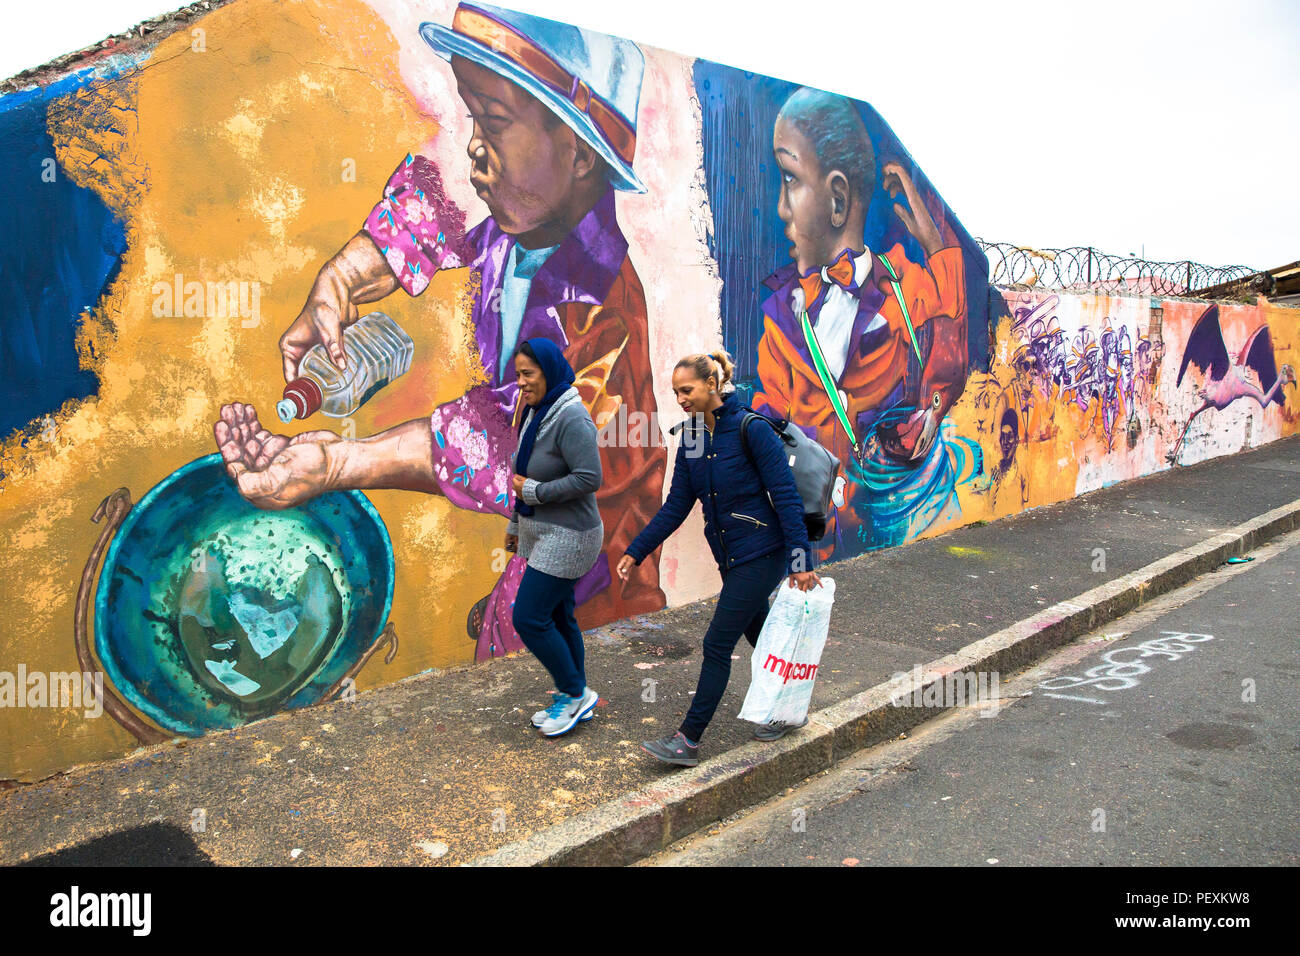 Cape Town water crisis themed mural, Western Cape Province, South Africa Stock Photo